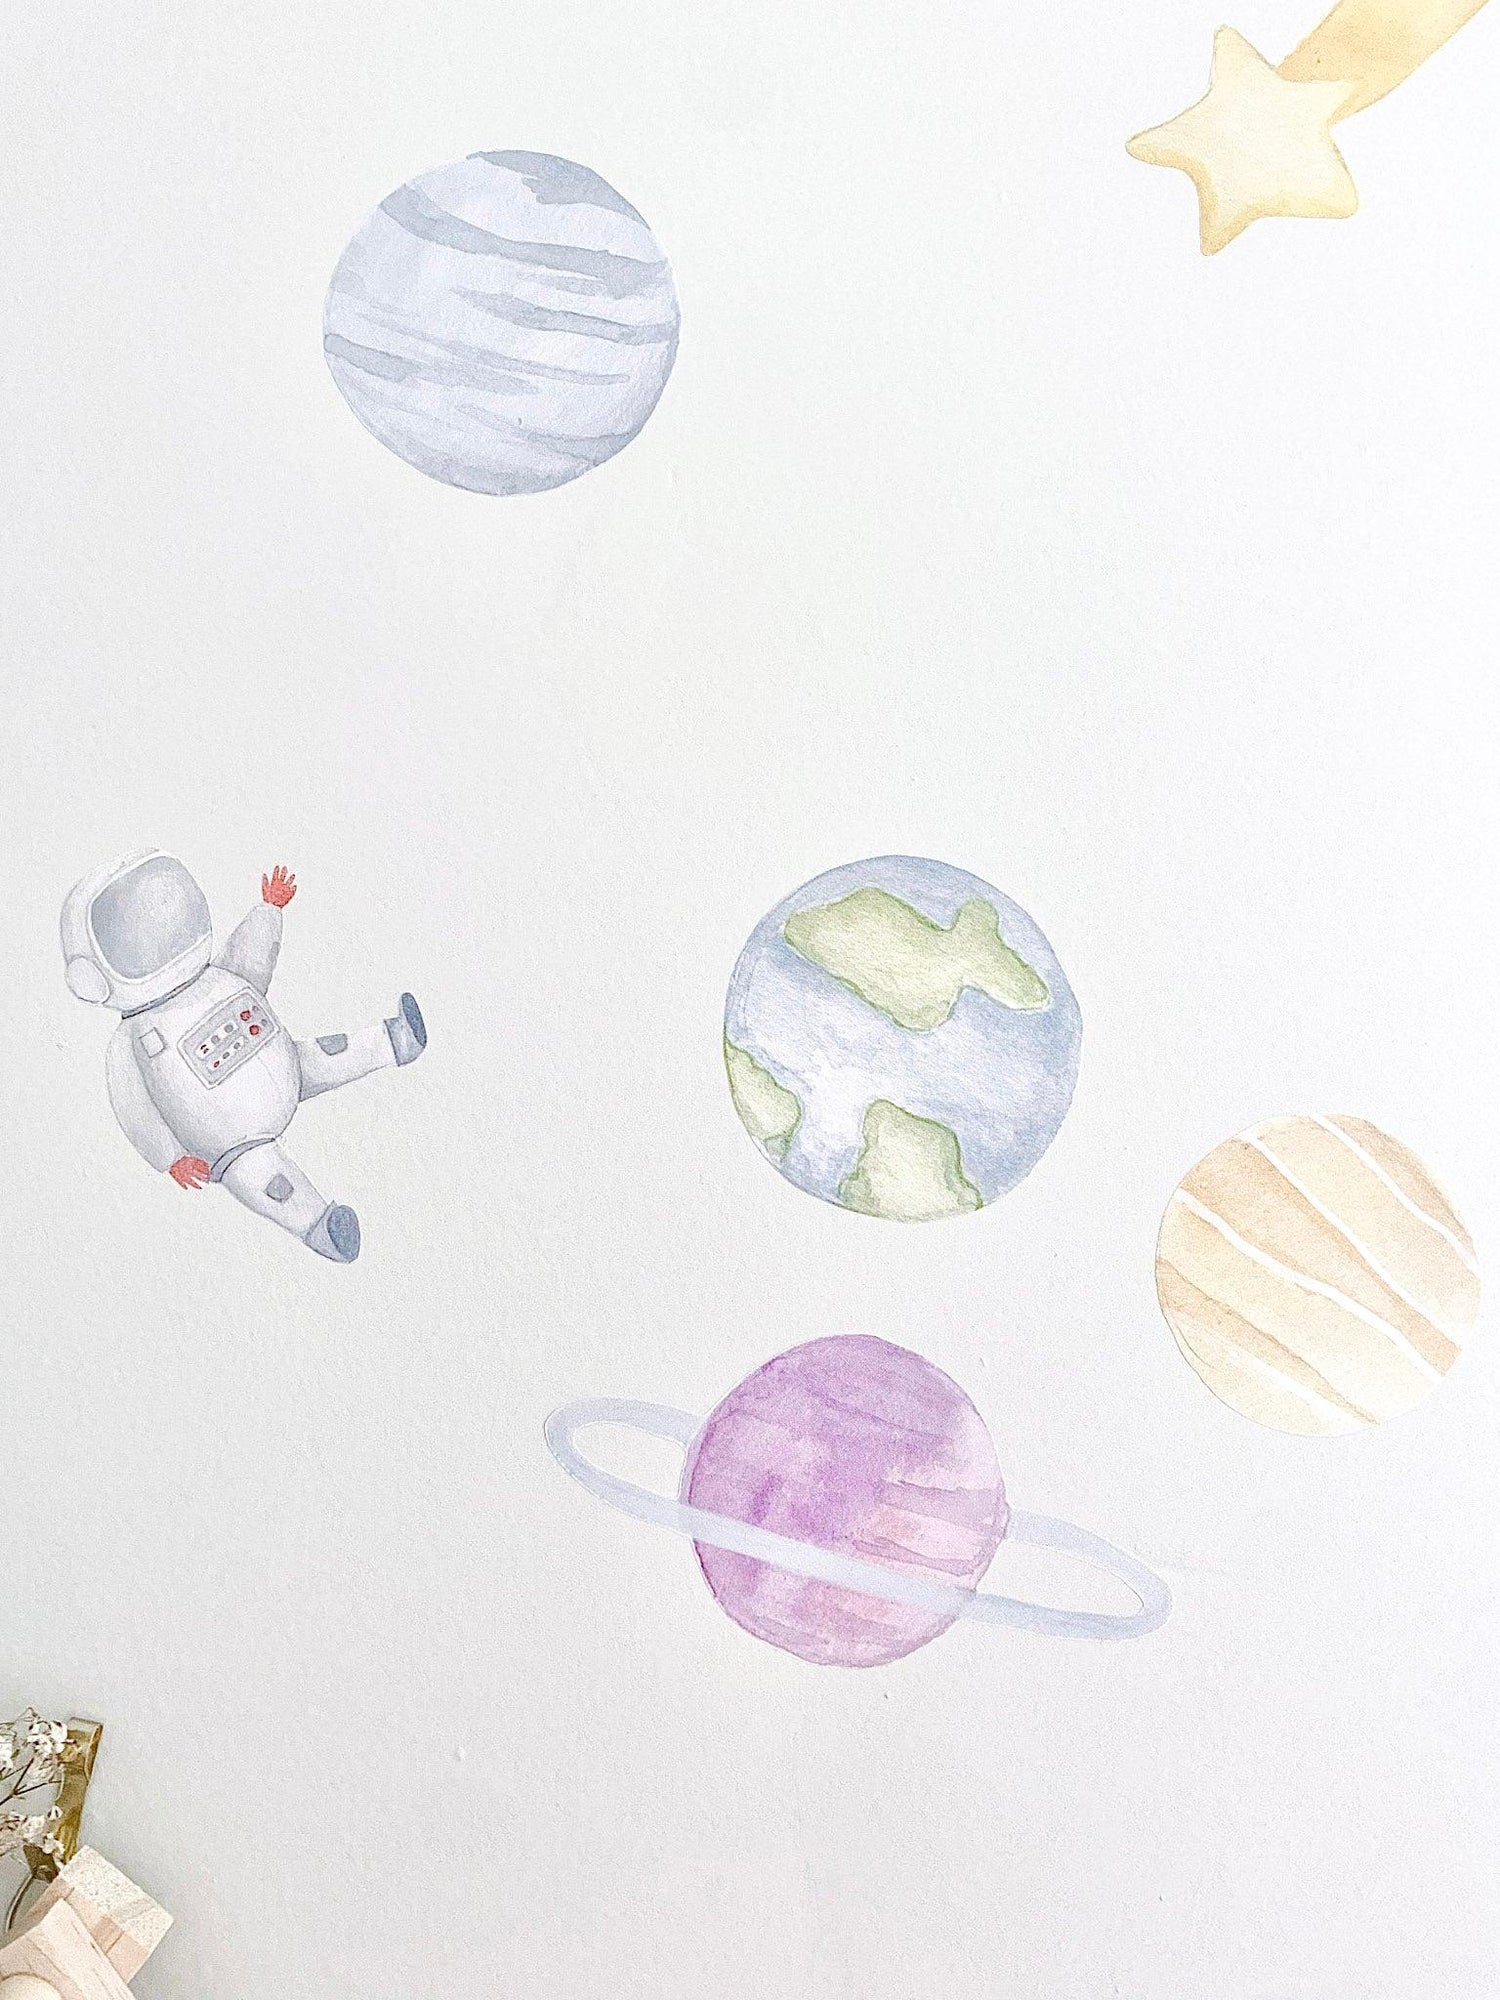 Solar System Wall Stickers For Your Little Astronaut - lovefrankieart